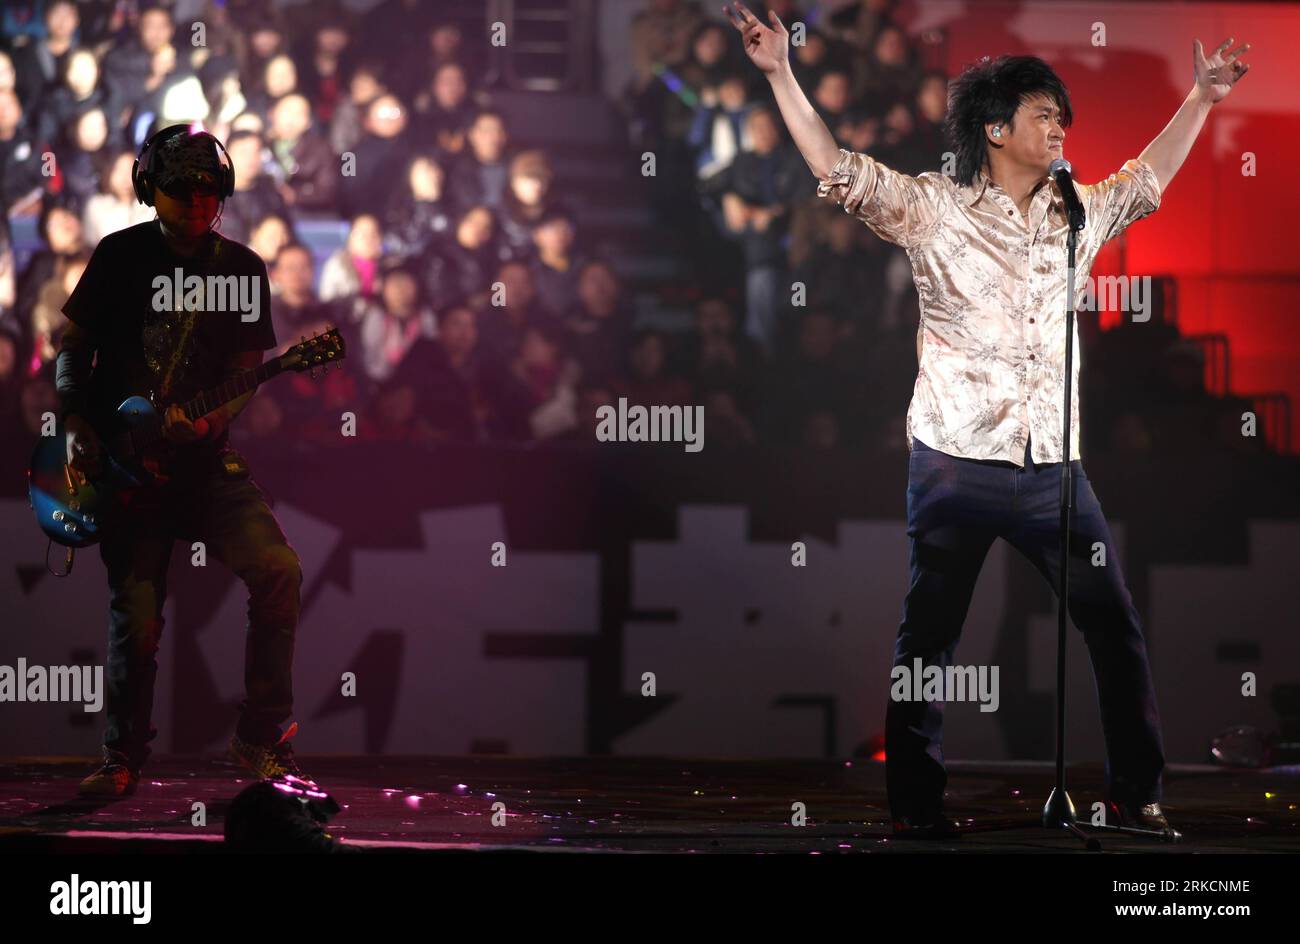 Bildnummer: 54786361  Datum: 05.01.2011  Copyright: imago/Xinhua (110106) -- NANTONG, Jan. 6, 2011 (Xinhua) -- Chinese singer Wakin Chau performs during his tour concert in Nantong, east China s Jiangsu Province, Jan. 5, 2011. Wakin Chau was born in Hong Kong and has released more than 40 albums. He was known as Emil Chau through the 1980s to 1990s, and he reverted to his given name Wakin. (Xinhua/Huang Zhe) (zhs) #CHINA-JIANGSU-WAKIN CHAU-CONCERT (CN) PUBLICATIONxNOTxINxCHN People Kultur Musik Aktion kbdig xo0x xsk 2011 quer     Bildnummer 54786361 Date 05 01 2011 Copyright Imago XINHUA  Nant Stock Photo